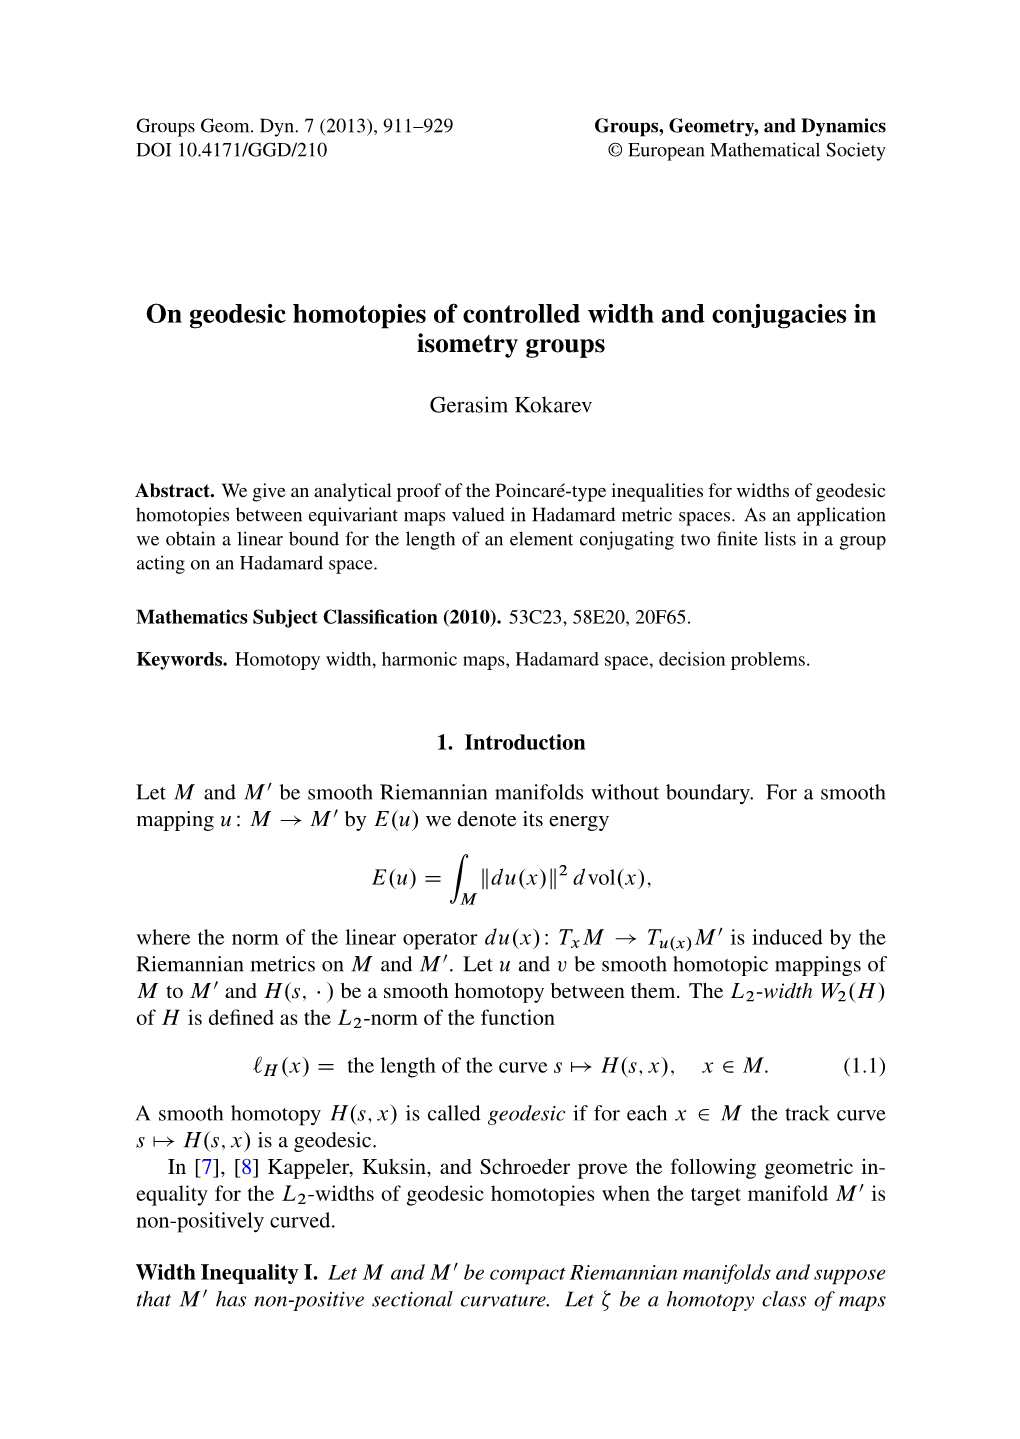 On Geodesic Homotopies of Controlled Width and Conjugacies in Isometry Groups